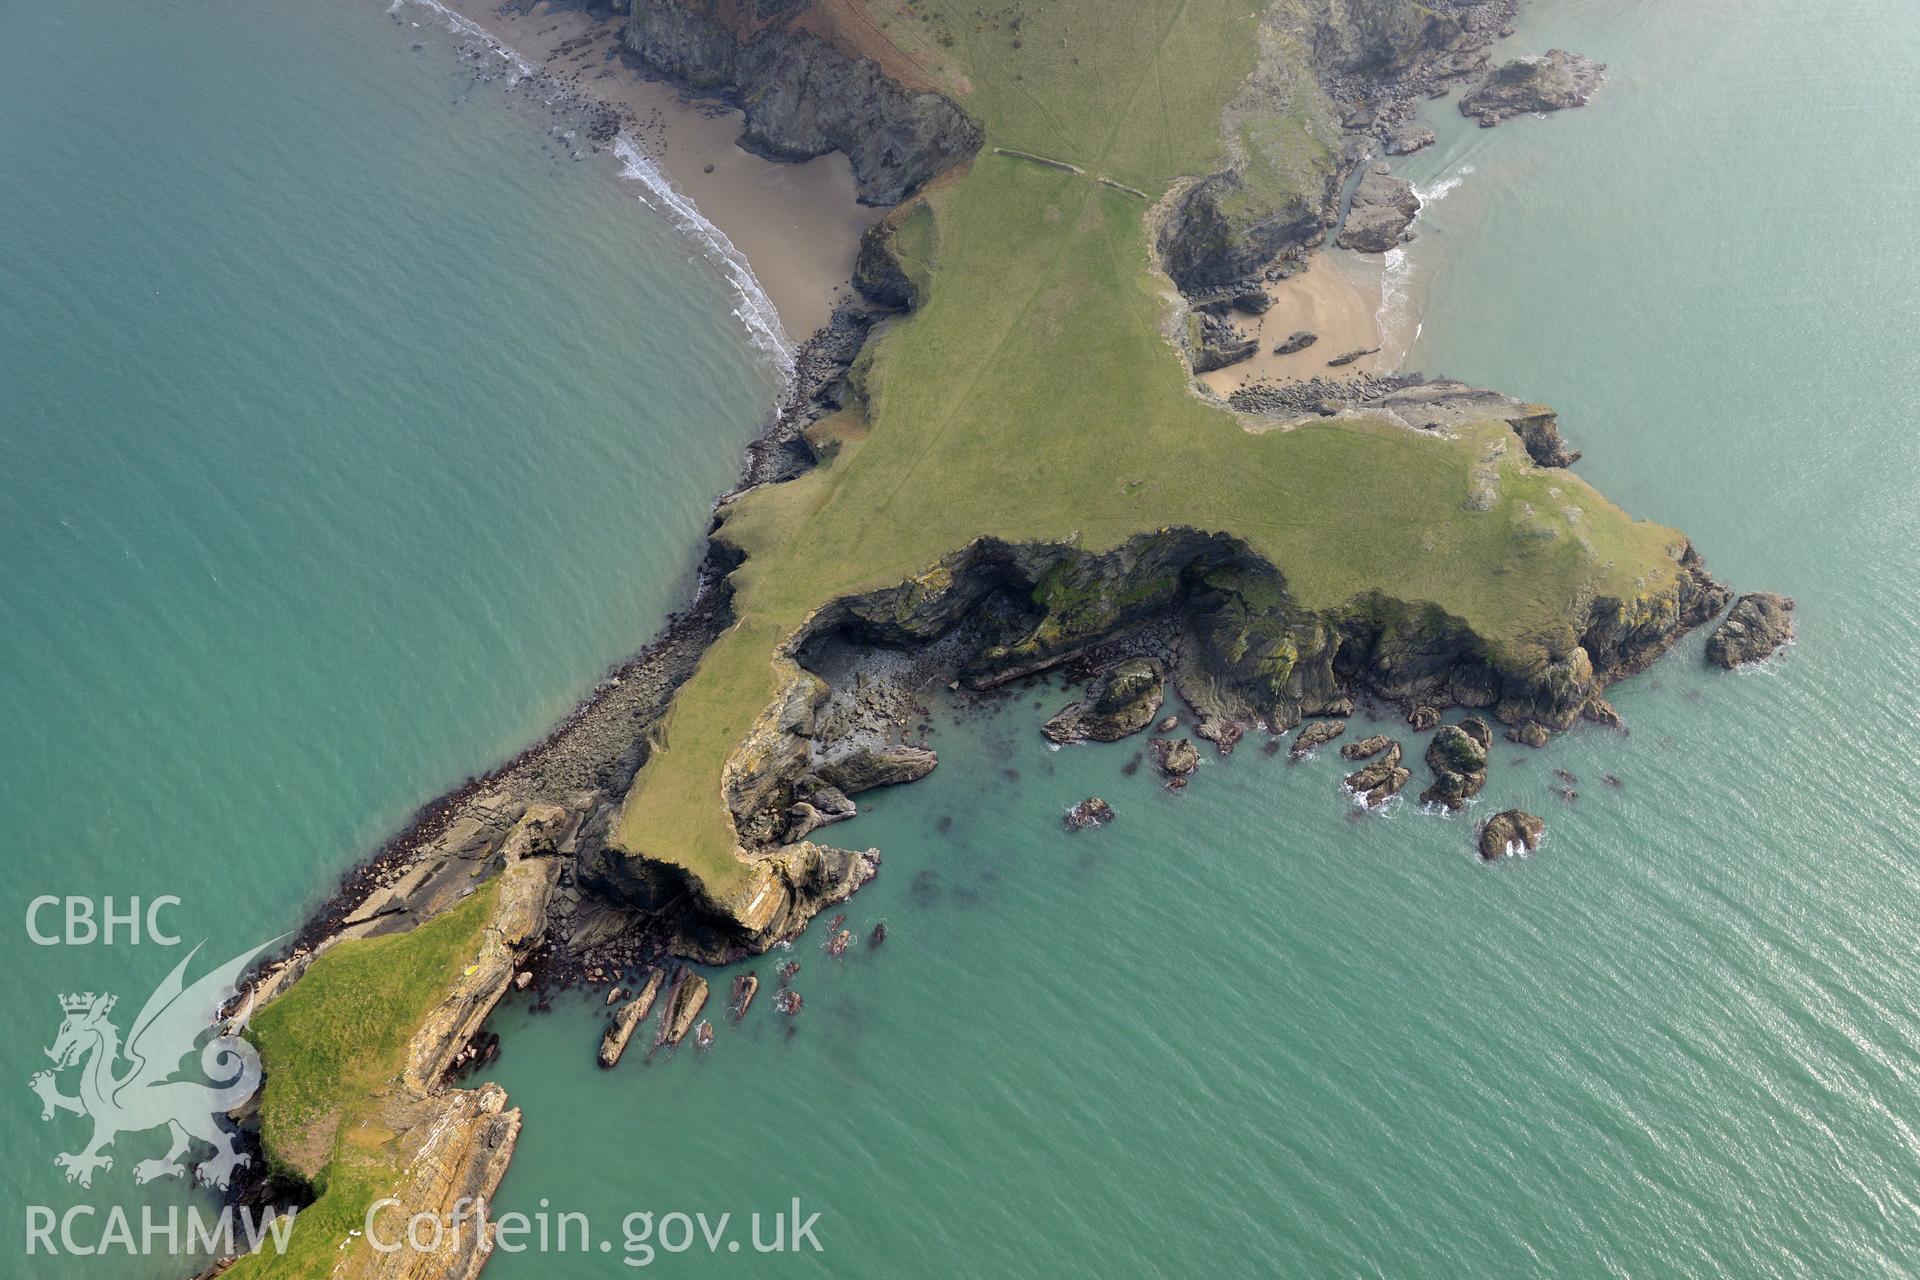 Royal Commission aerial photograph of Ynys Lochtyn taken on 27th March 2017. Baseline aerial reconnaissance survey for the CHERISH Project. ? Crown: CHERISH PROJECT 2017. Produced with EU funds through the Ireland Wales Co-operation Programme 2014-2020. All material made freely available through the Open Government Licence.